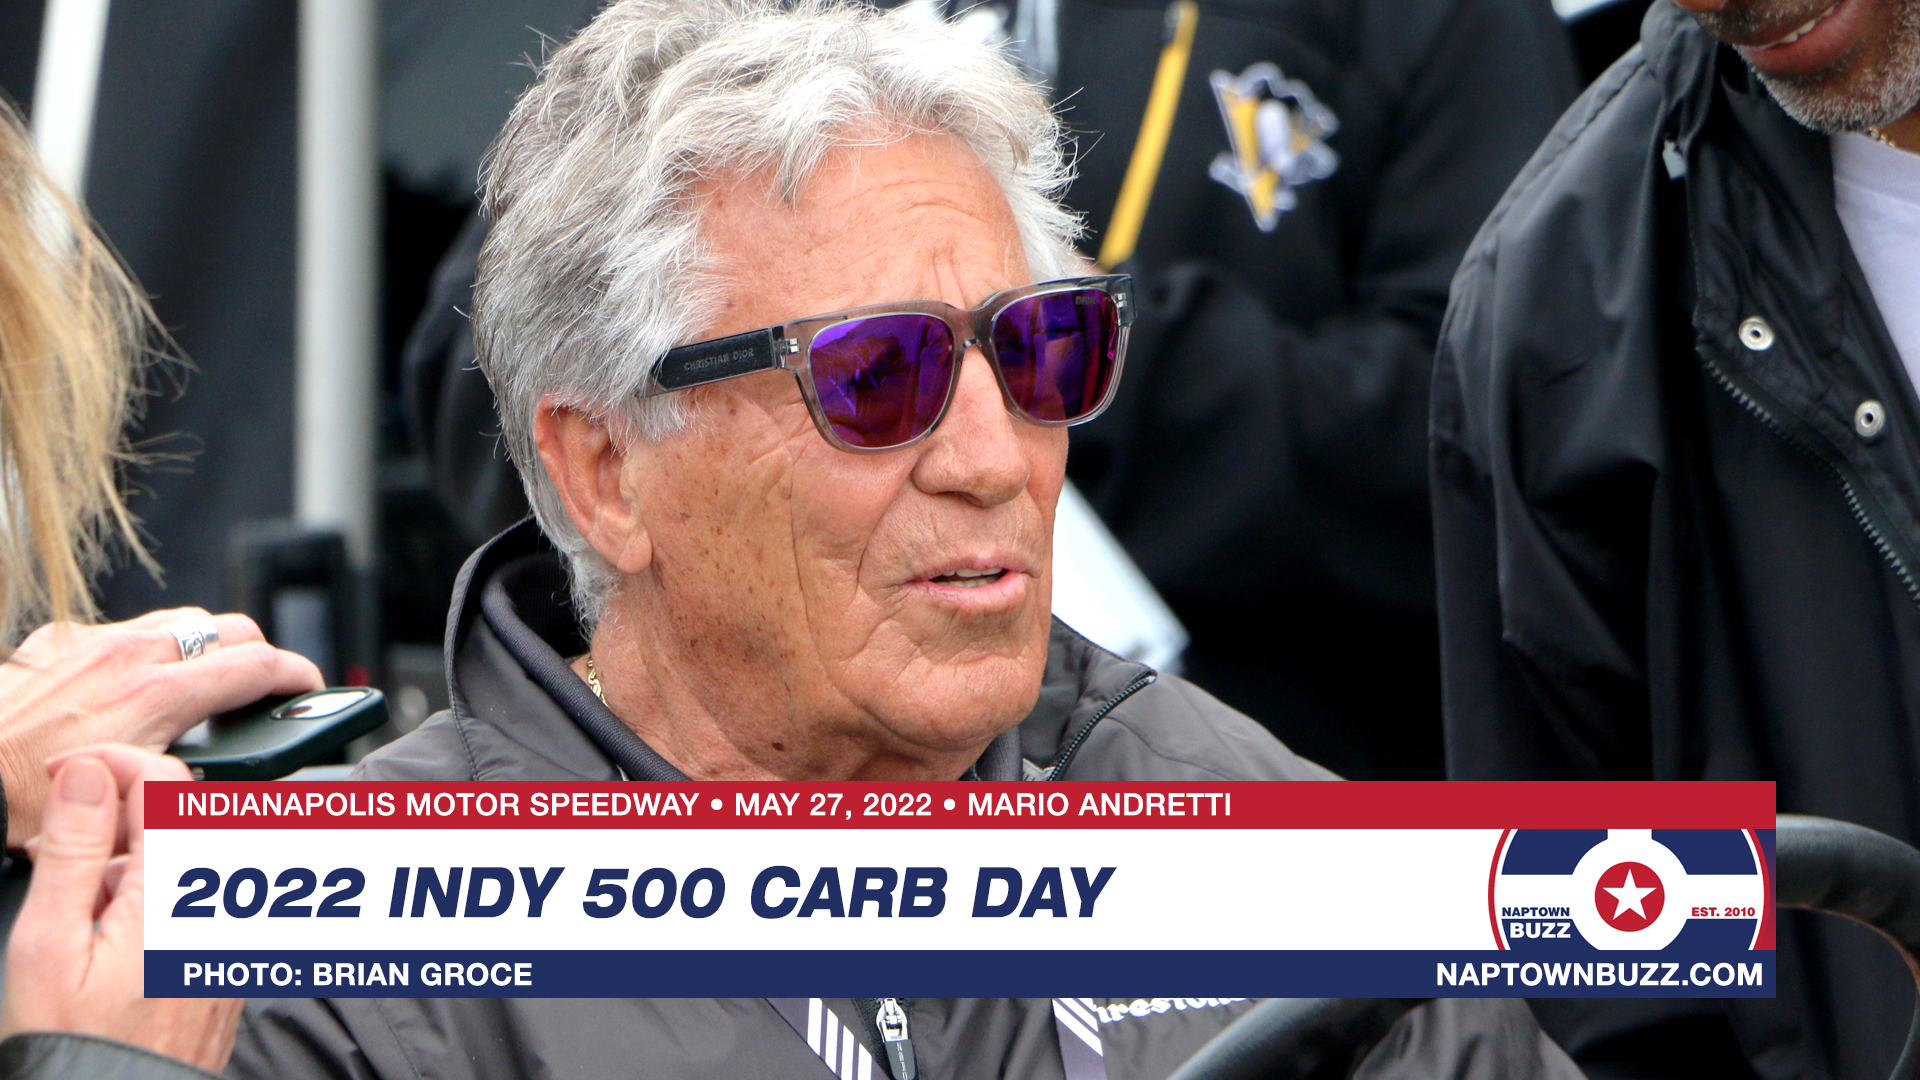 Indy 500 Carb Day May 27, 2022 Mario Andretti